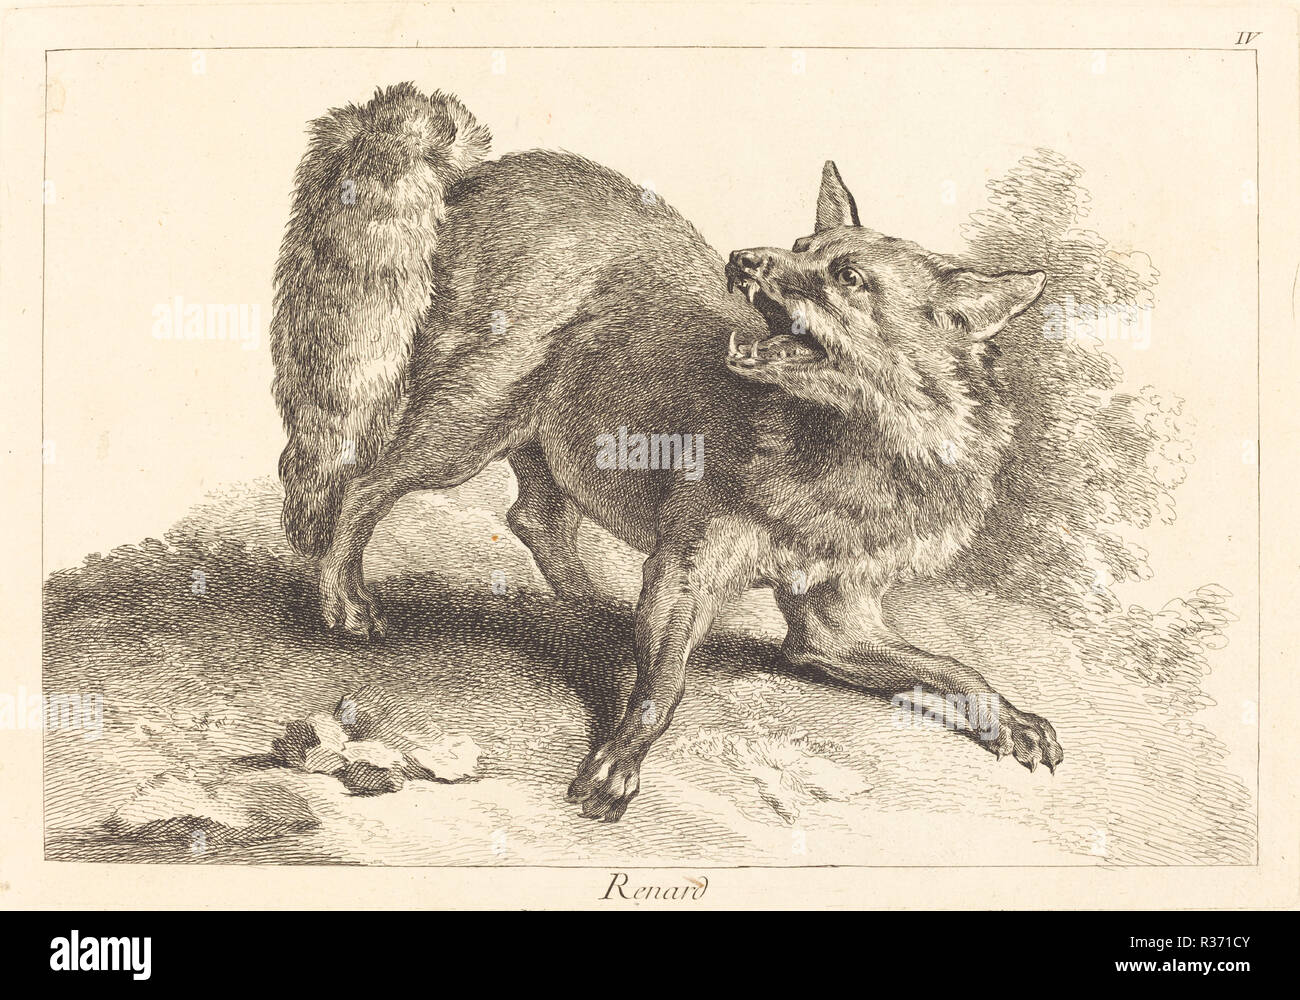 Renard (Fox). Medium: etching finished with burin. Museum: National Gallery of Art, Washington DC. Author: Jacques-Philippe Le Bas and Jean Eric Rehn after Jean-Baptiste Oudry. Stock Photo